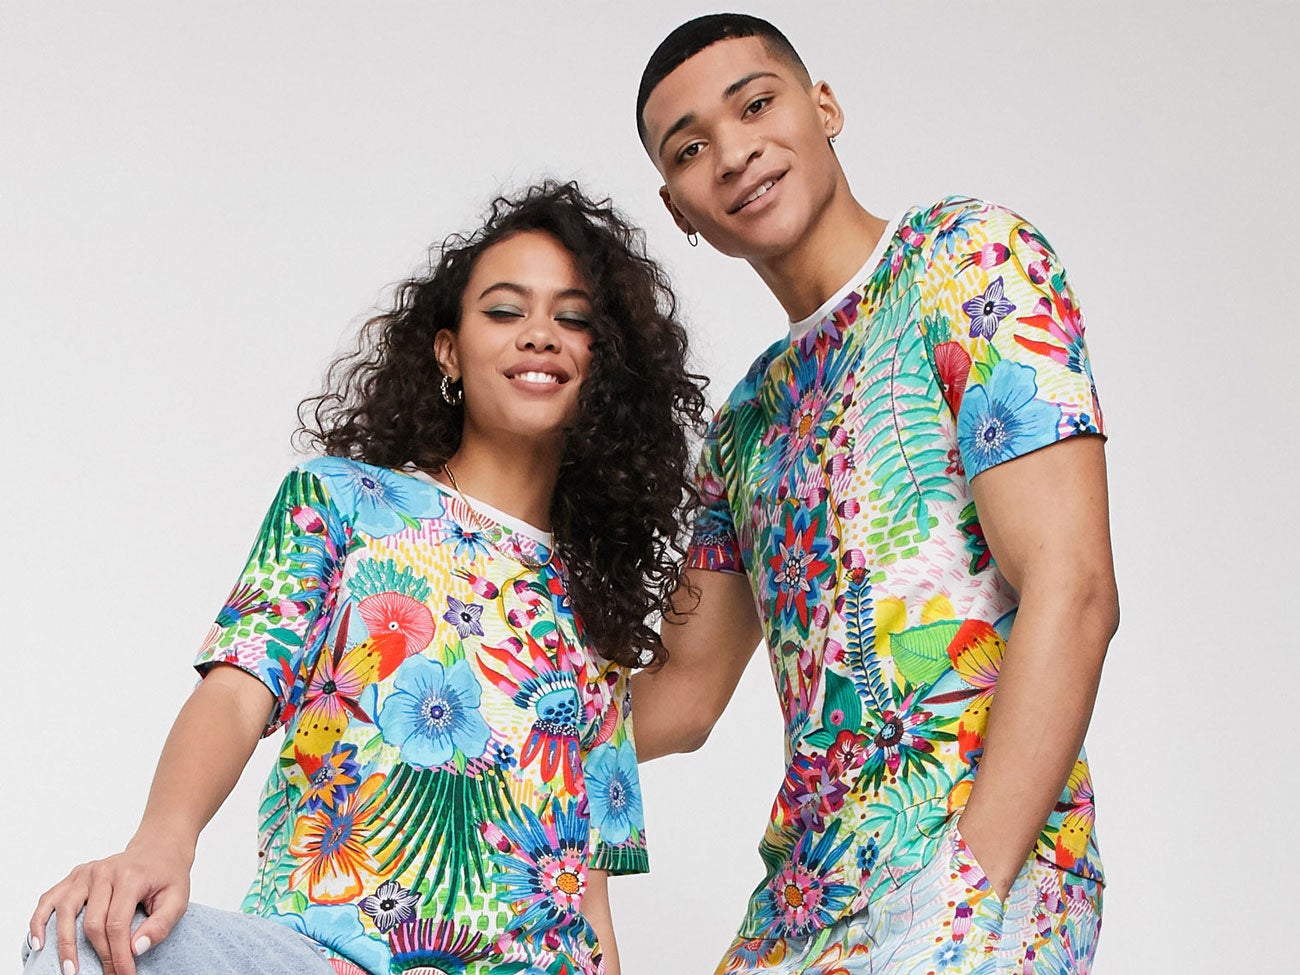 ASOS Partners With SOKO Kenya For Latest Collection